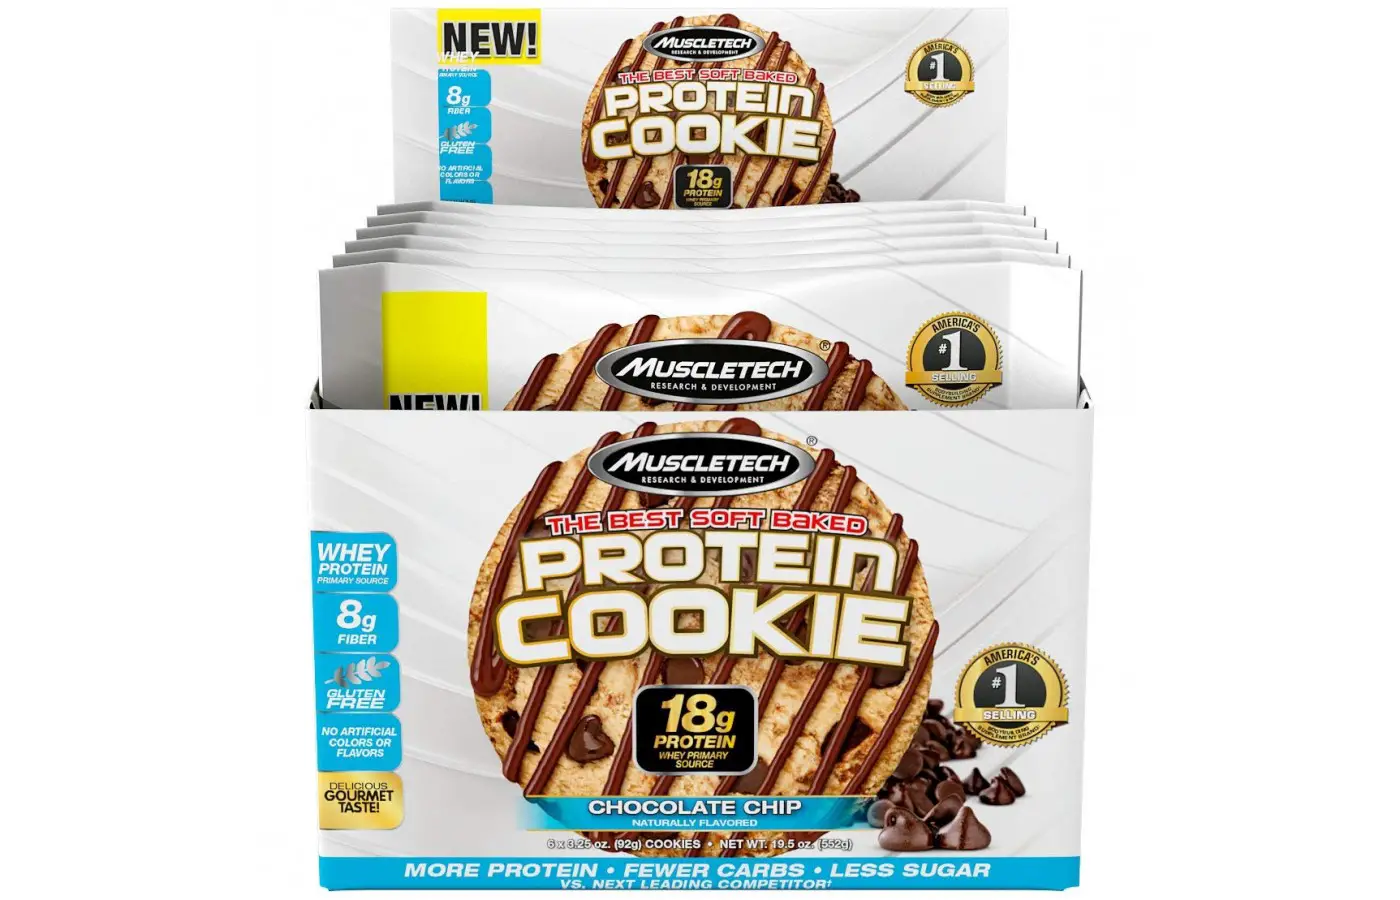 protein cookie box